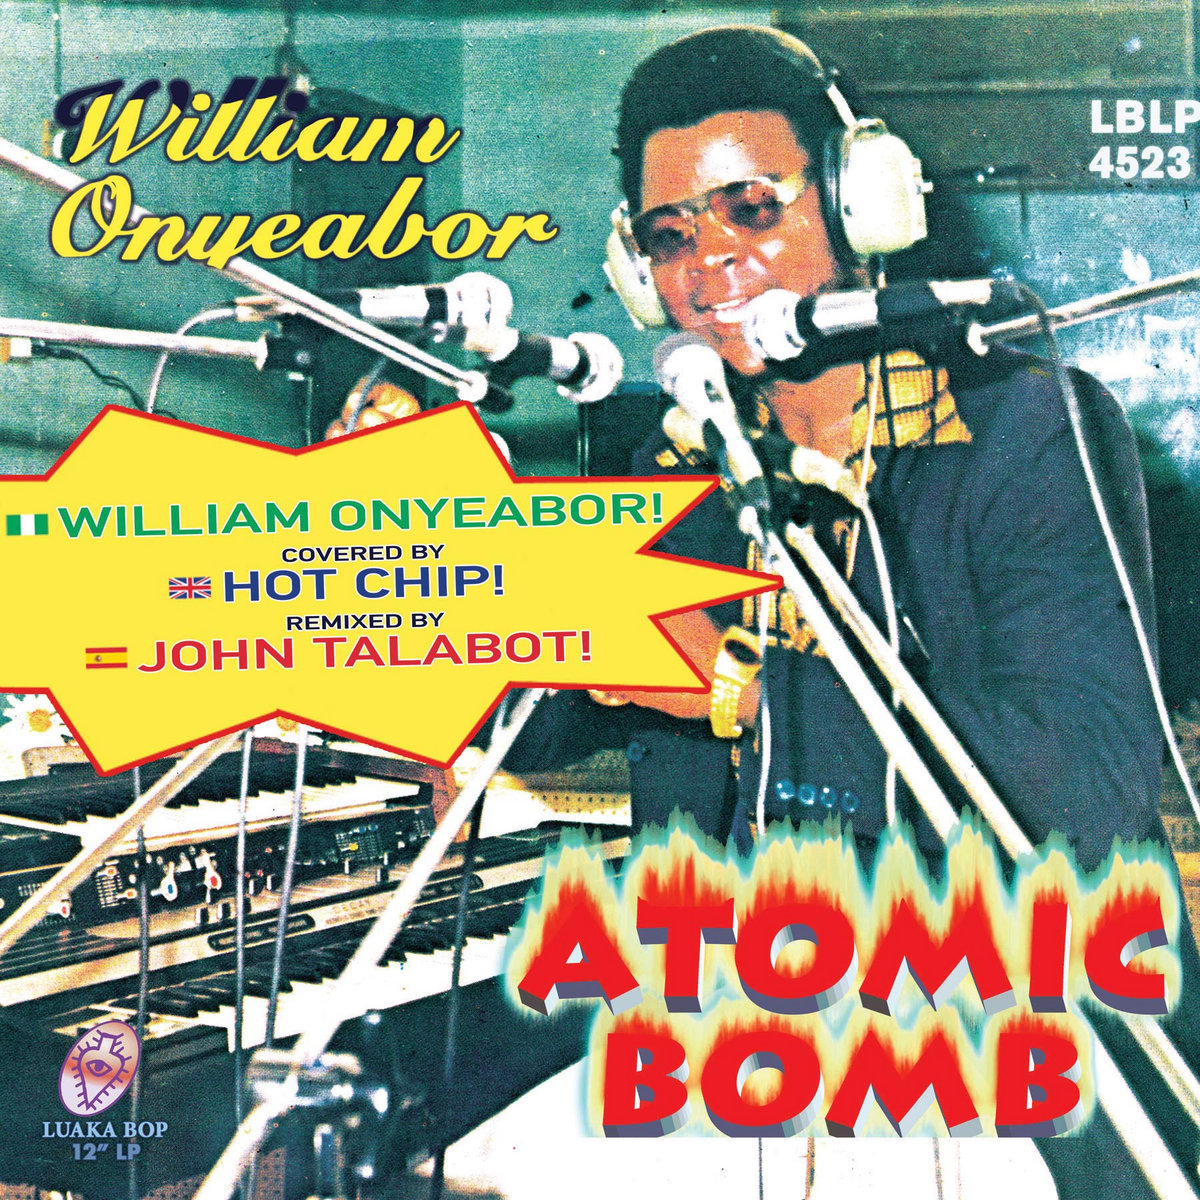 Atomic Bomb by Hot Chip remixed by John Talabot | William Onyeabor